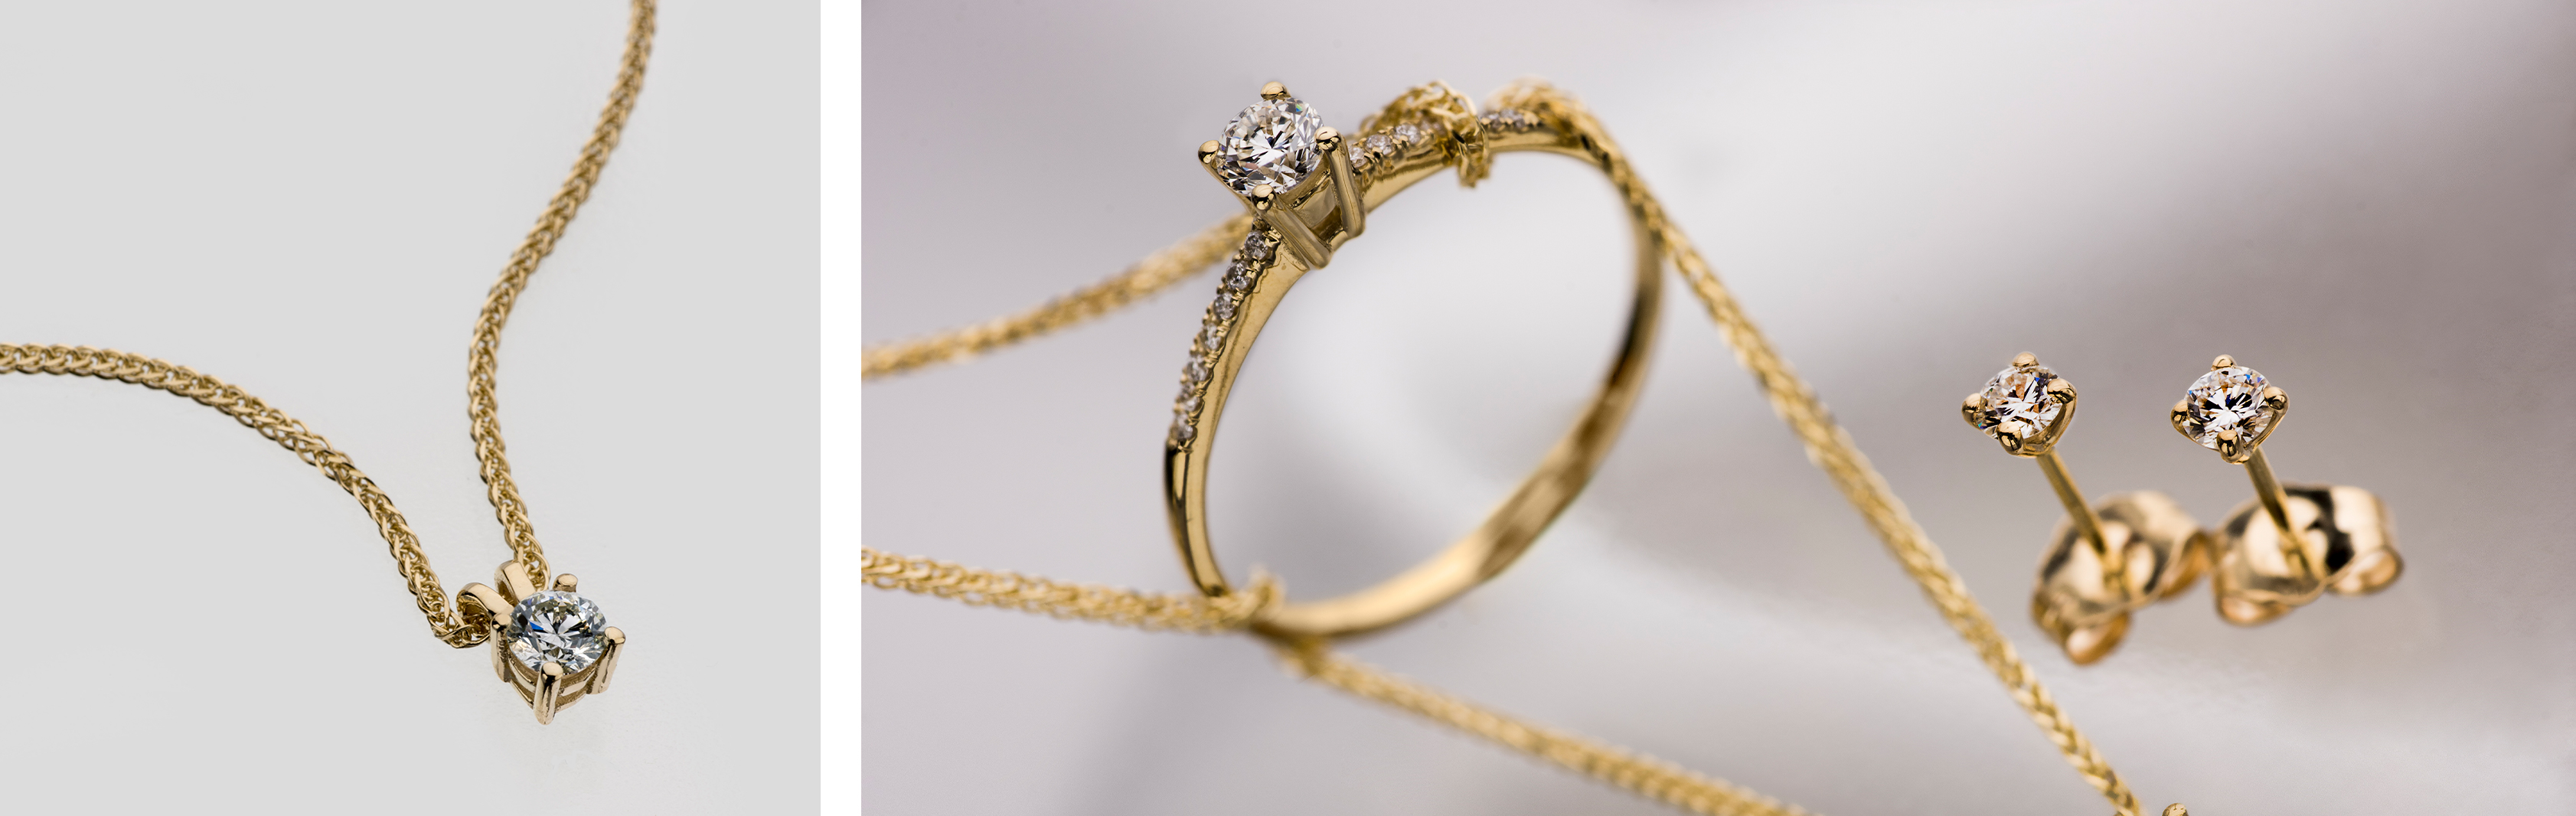 Golden Solitaire Collection | 14K Gold and Diamond Jewelry